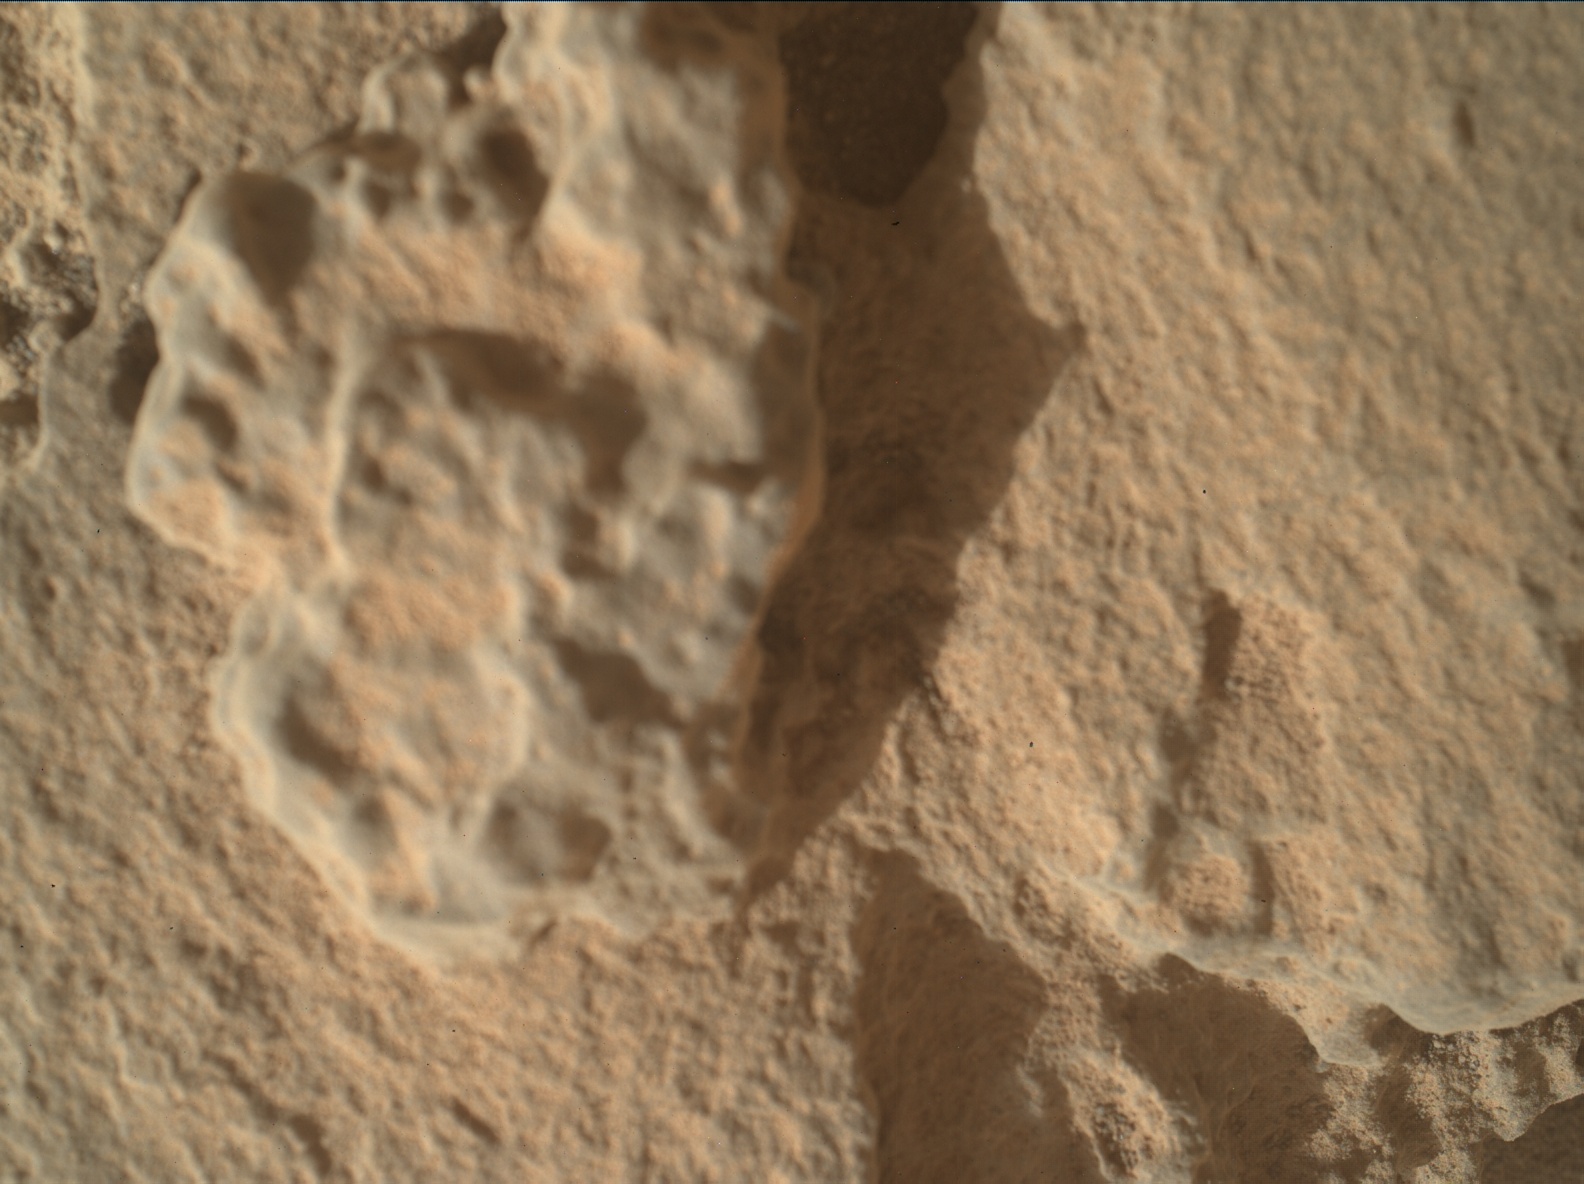 Nasa's Mars rover Curiosity acquired this image using its Mars Hand Lens Imager (MAHLI) on Sol 3723